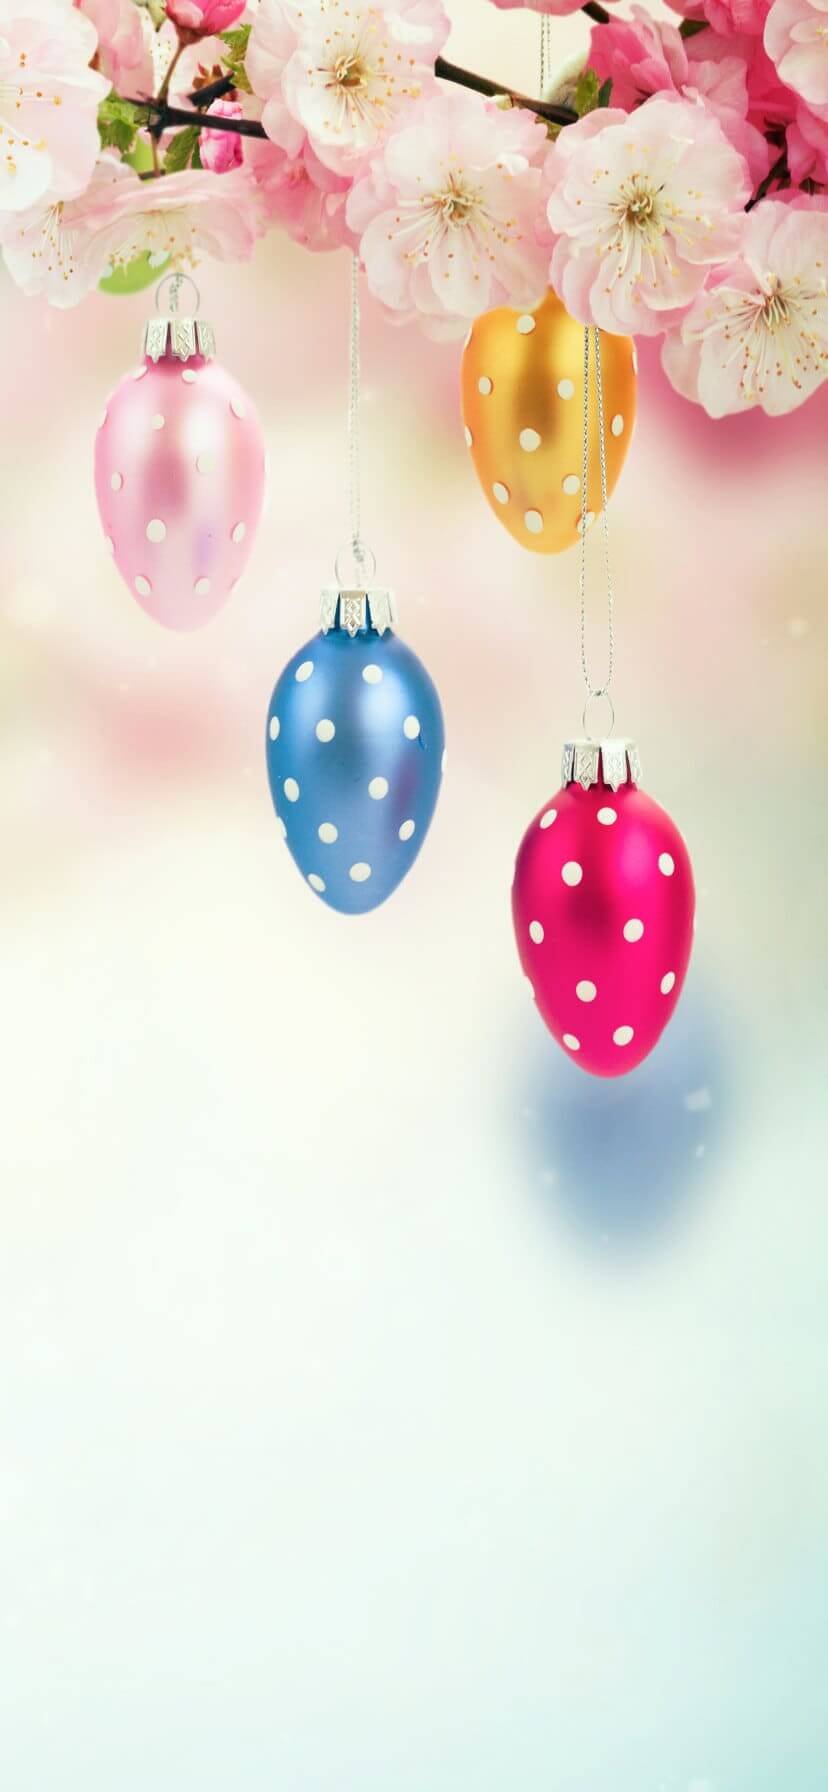 4K Free Easter Wallpaper for android